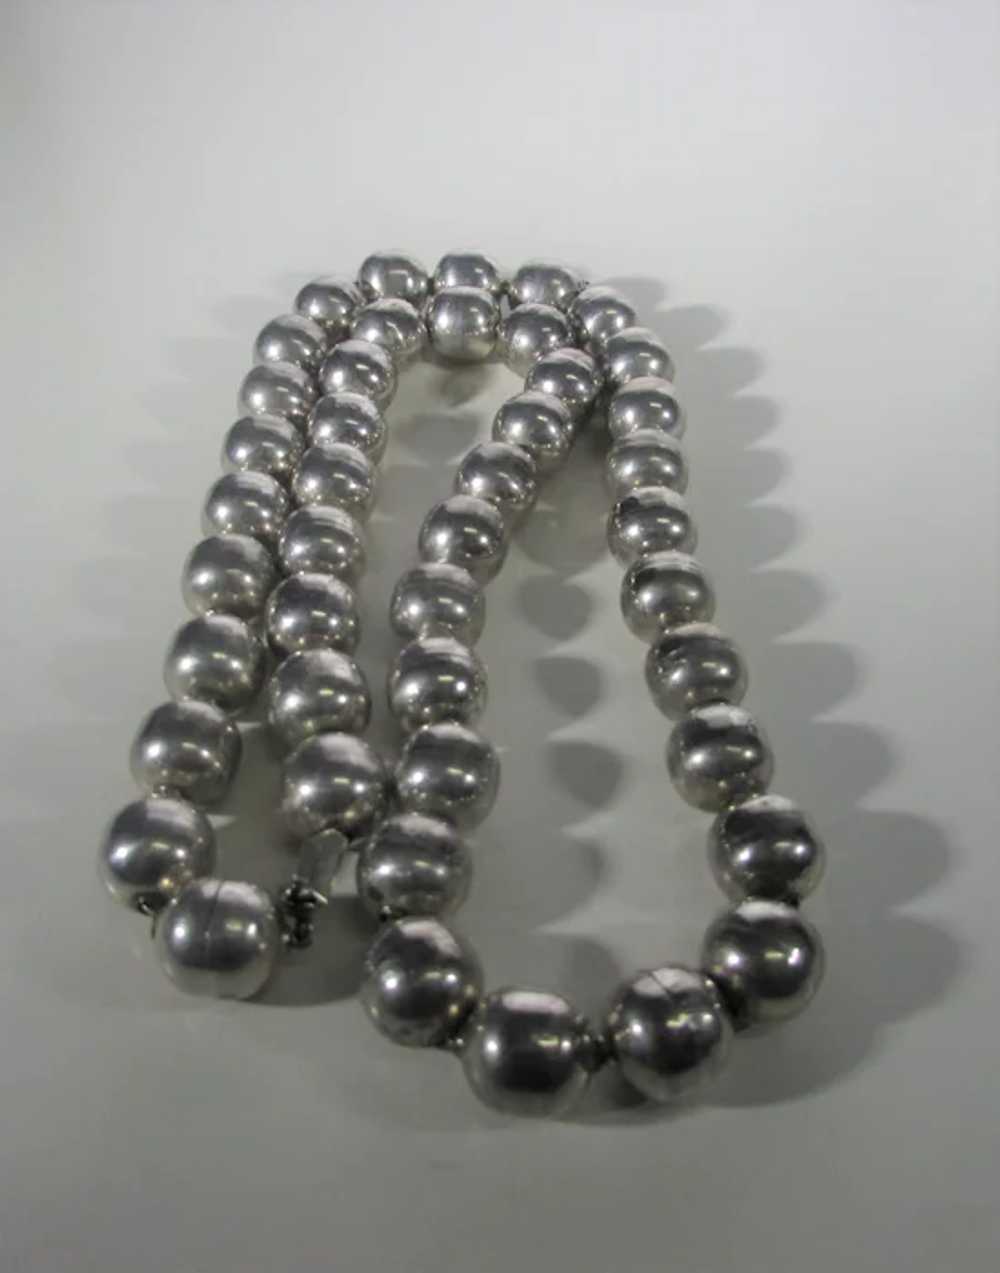 Vintage Silver Tone Beads on a Chain by AlPaca - image 10